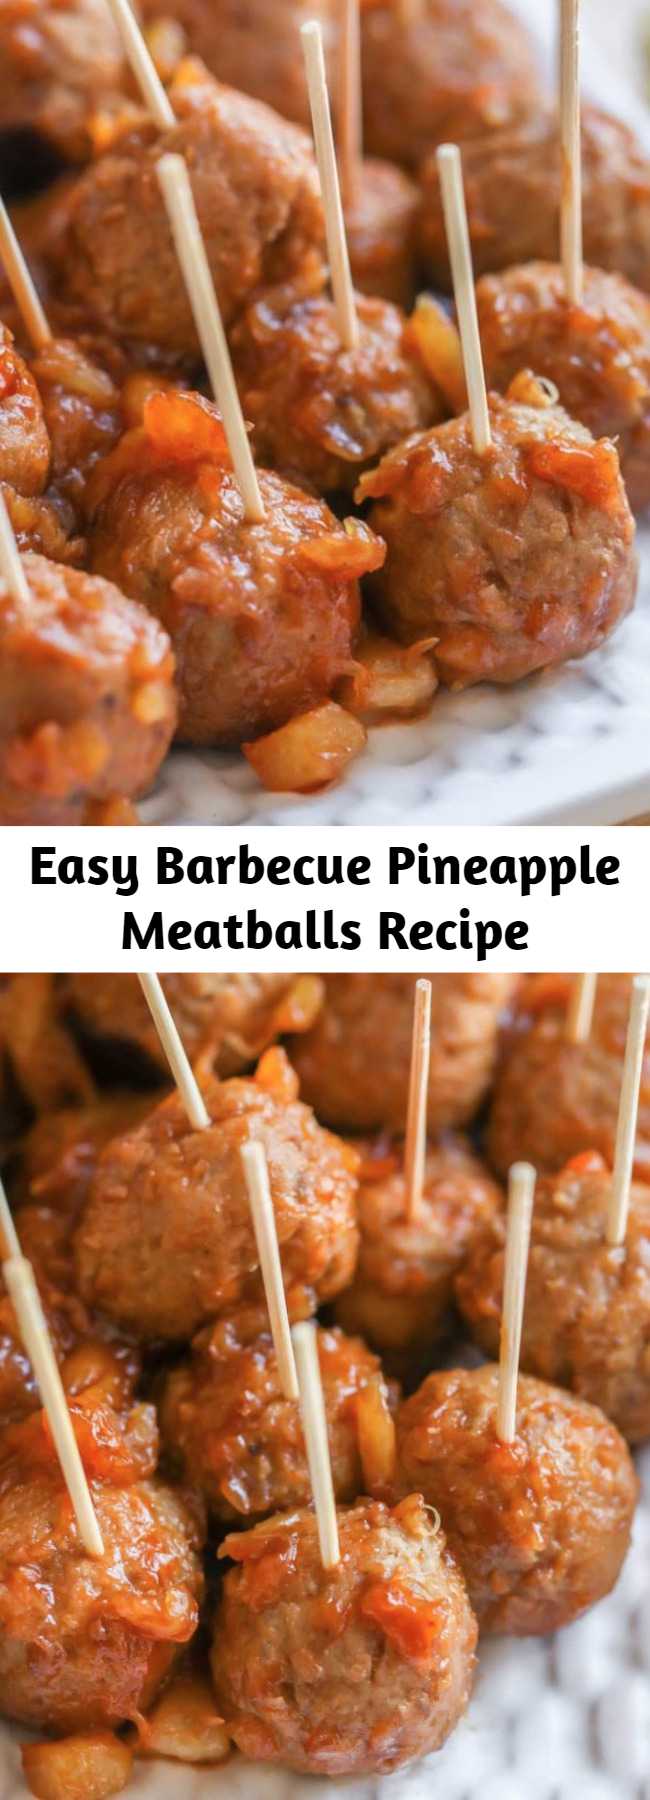 Easy Barbecue Pineapple Meatballs Recipe - These Barbecue Pineapple Meatballs use just 3 ingredients - barbecue sauce, frozen meatballs, and crushed pineapple. They are perfect as an appetizer recipe for parties and get togethers or even a side dish for dinner.